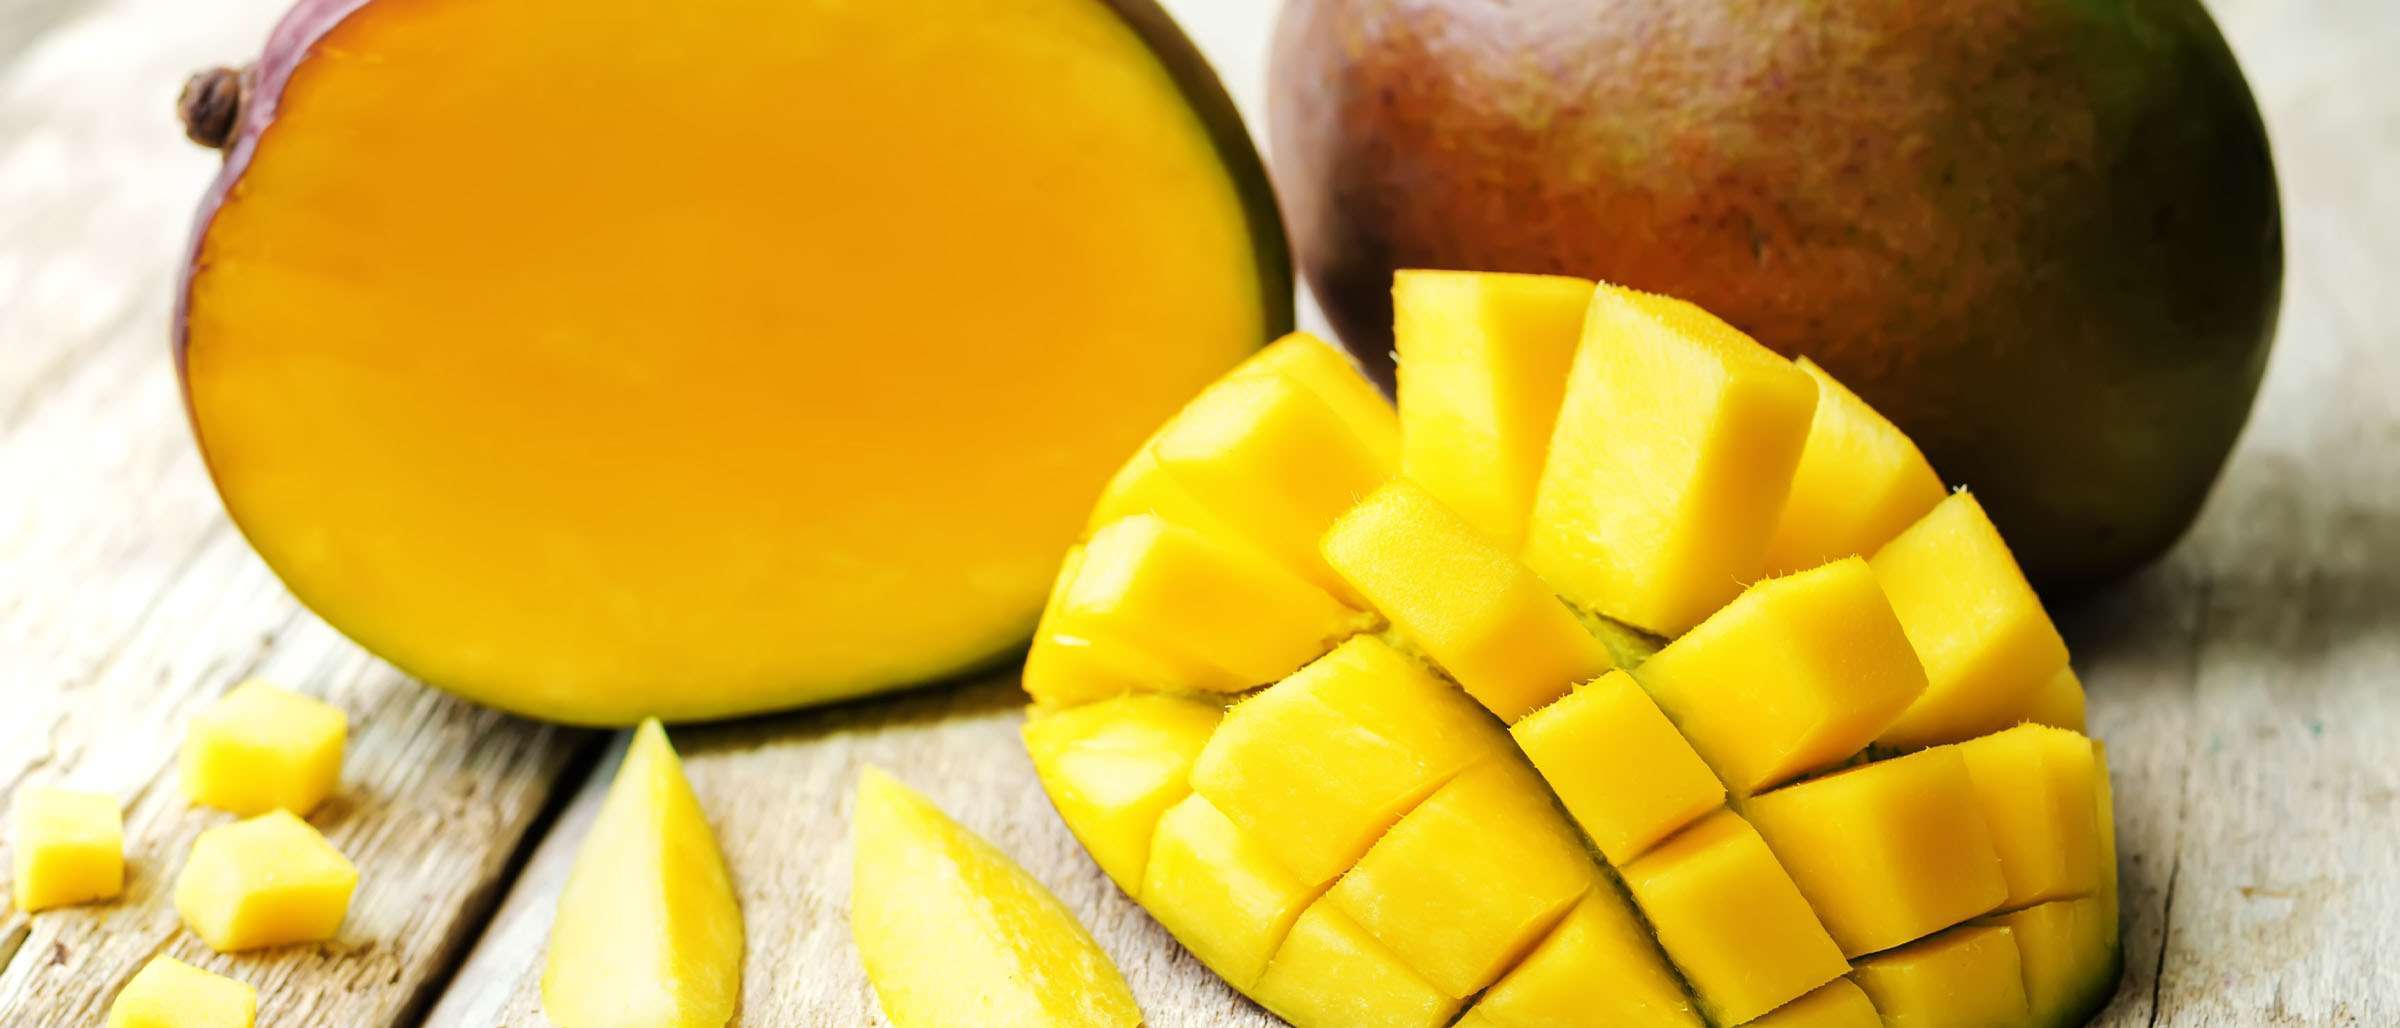 Why Is Mango the “Queen of Fruits”? 6 Facts You Should Know About Mangos